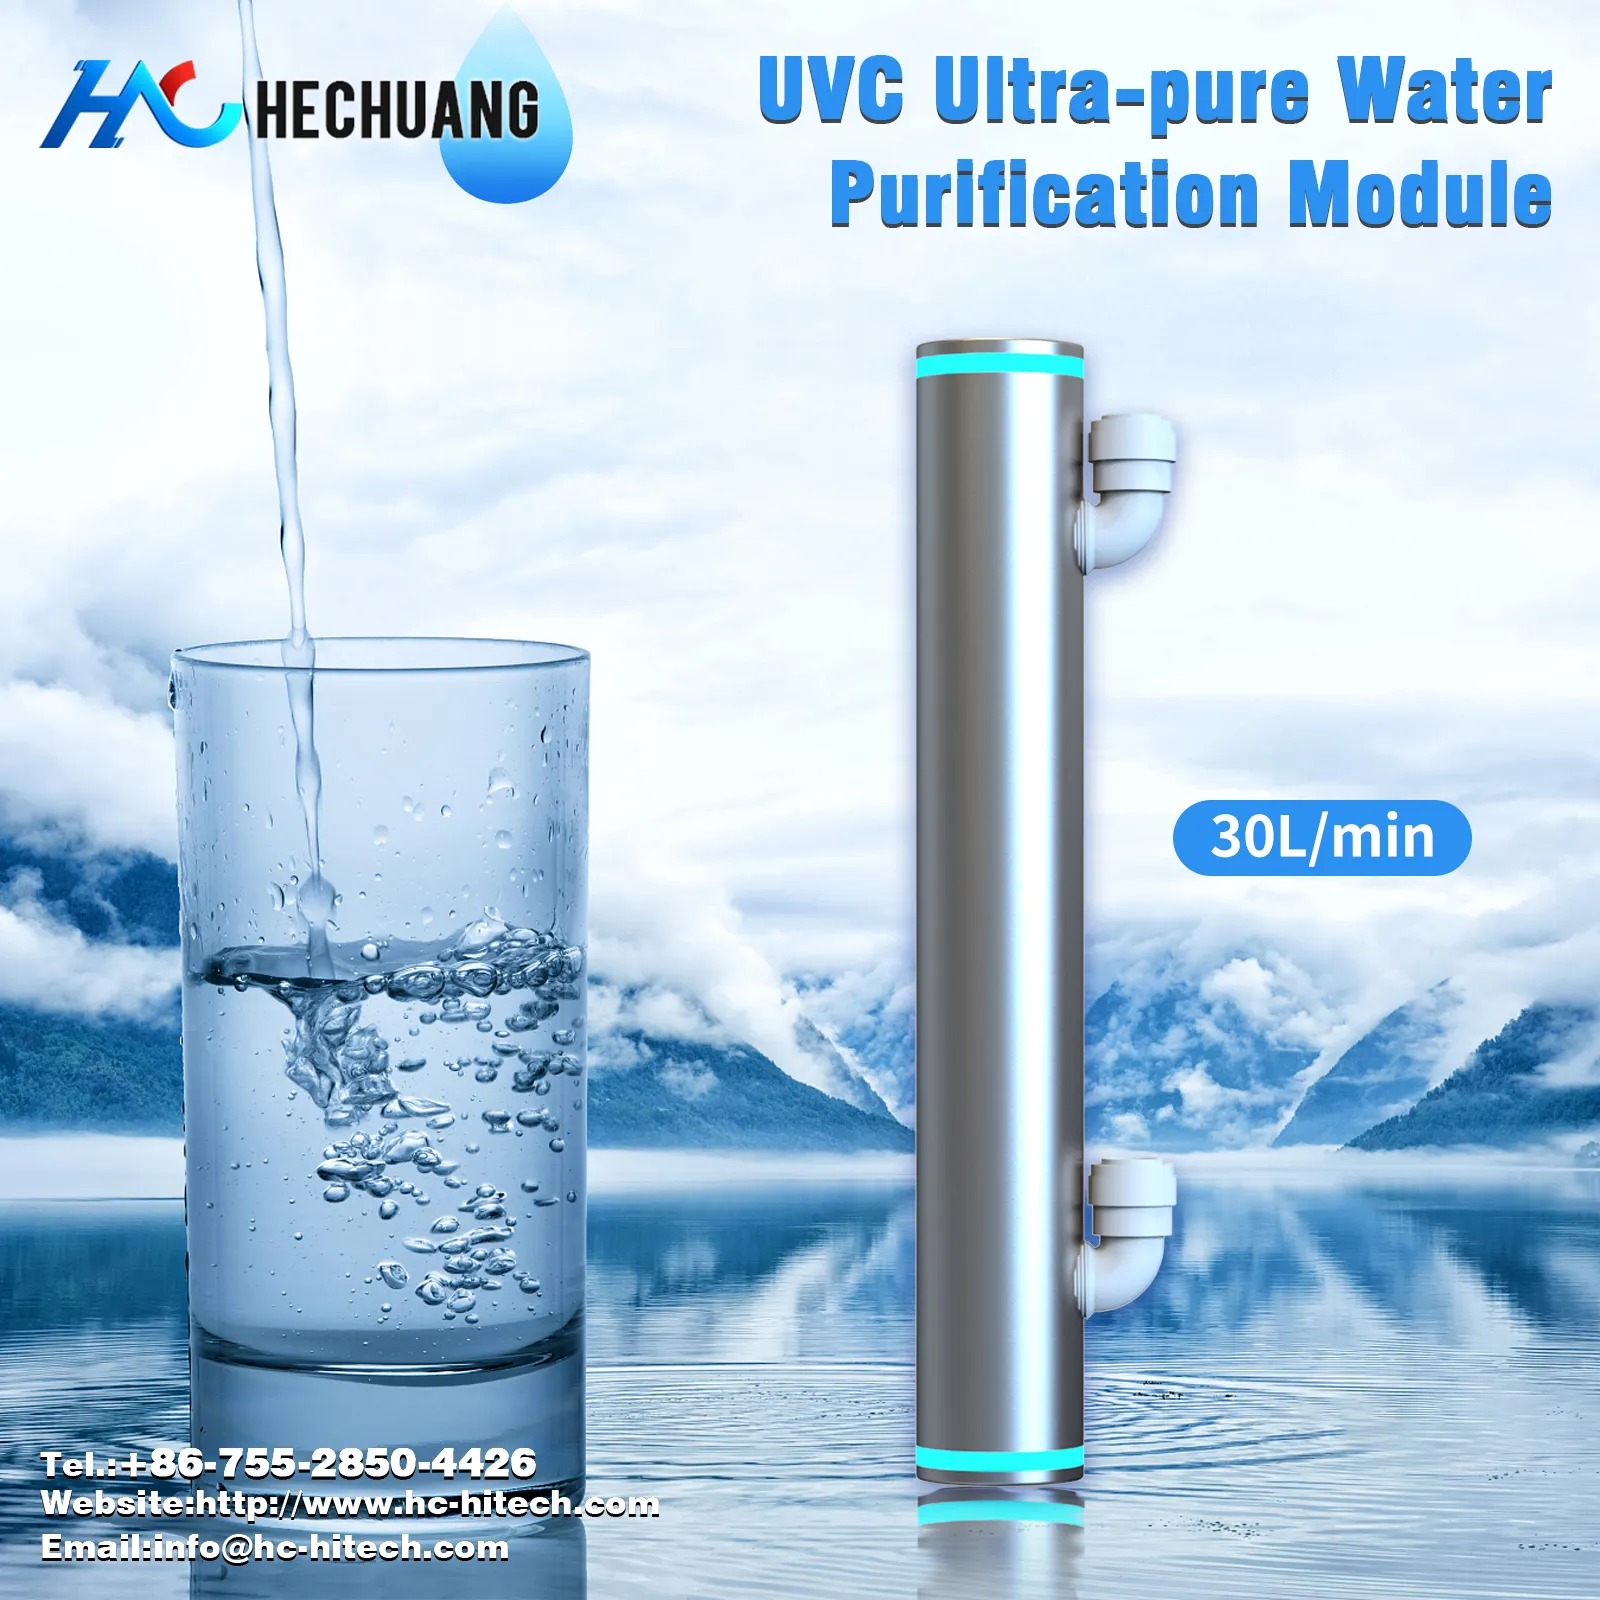 UVC Water Sterilizer for RV Yacht Hospital Hotel Household with 99.999% Disinfection Rate with 30 LPM Water Flow Rate